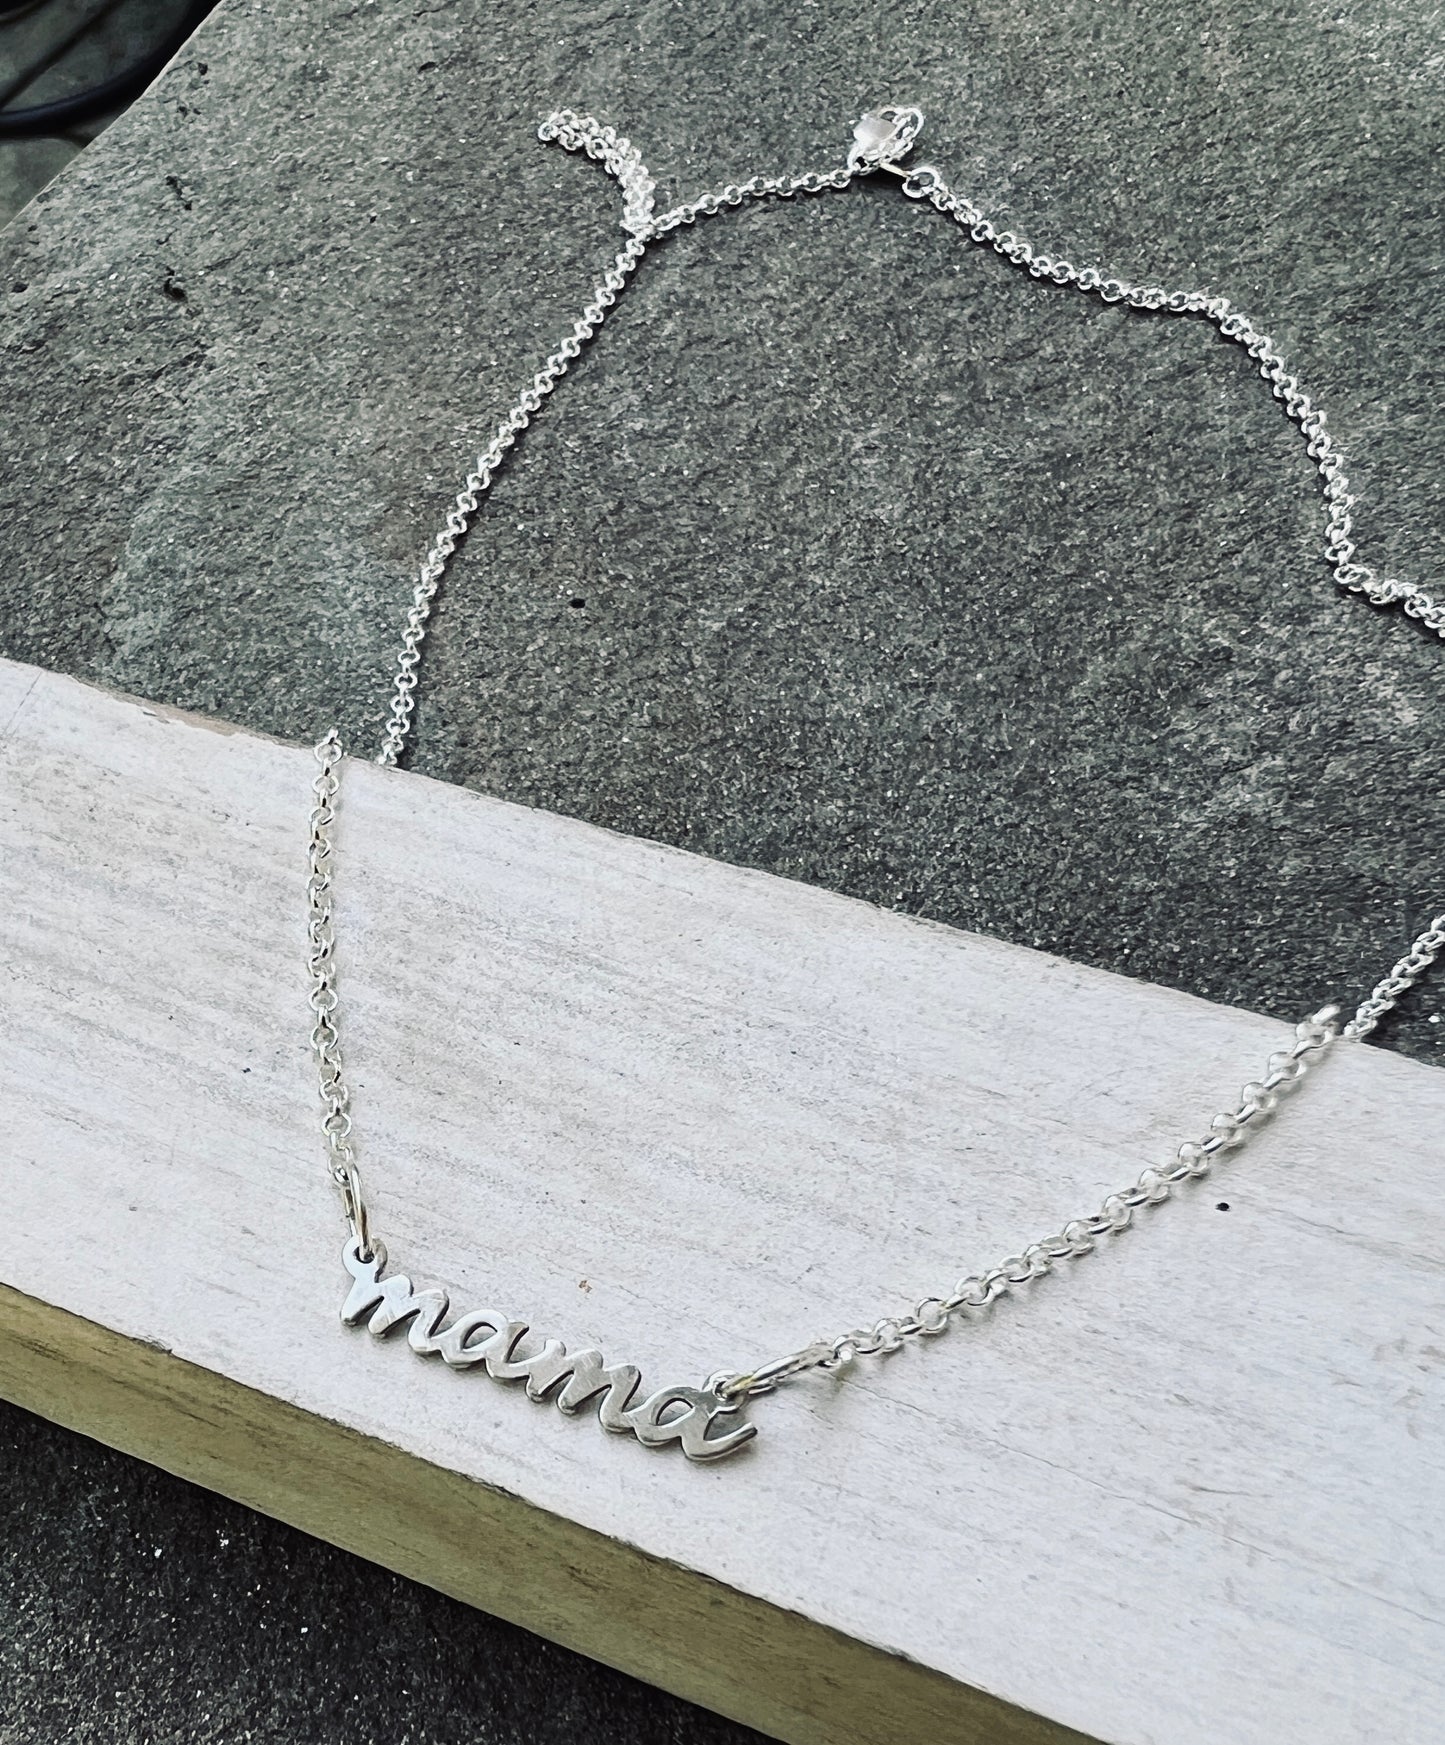 Mama Necklace in Solid Sterling Silver